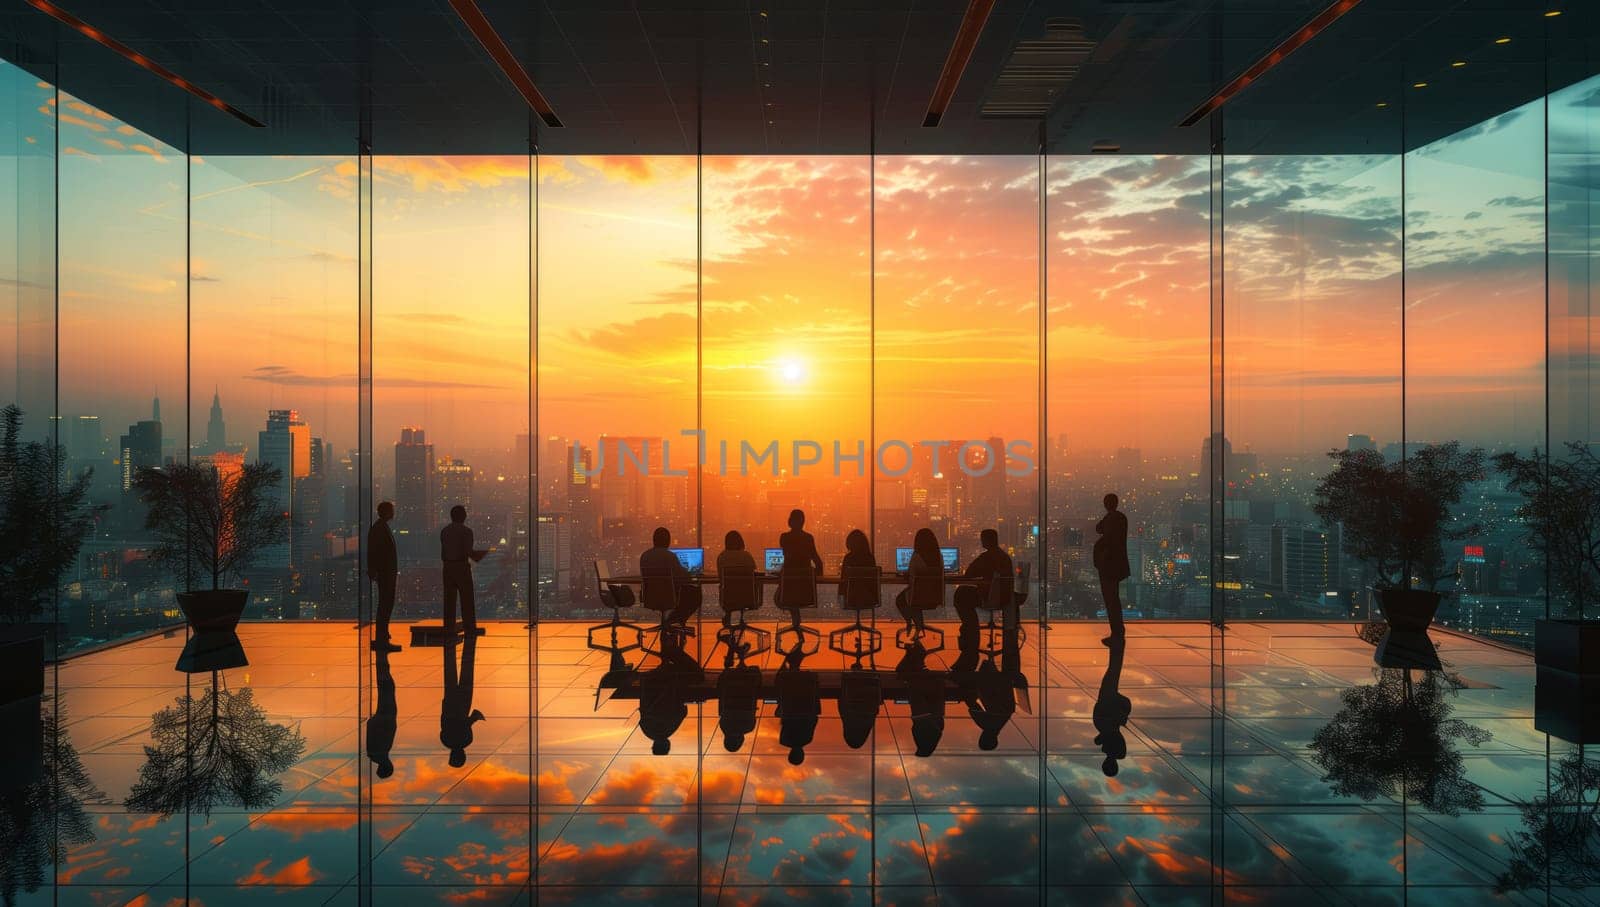 Group at table by window overlooking city at sunset, skyline aglow by richwolf